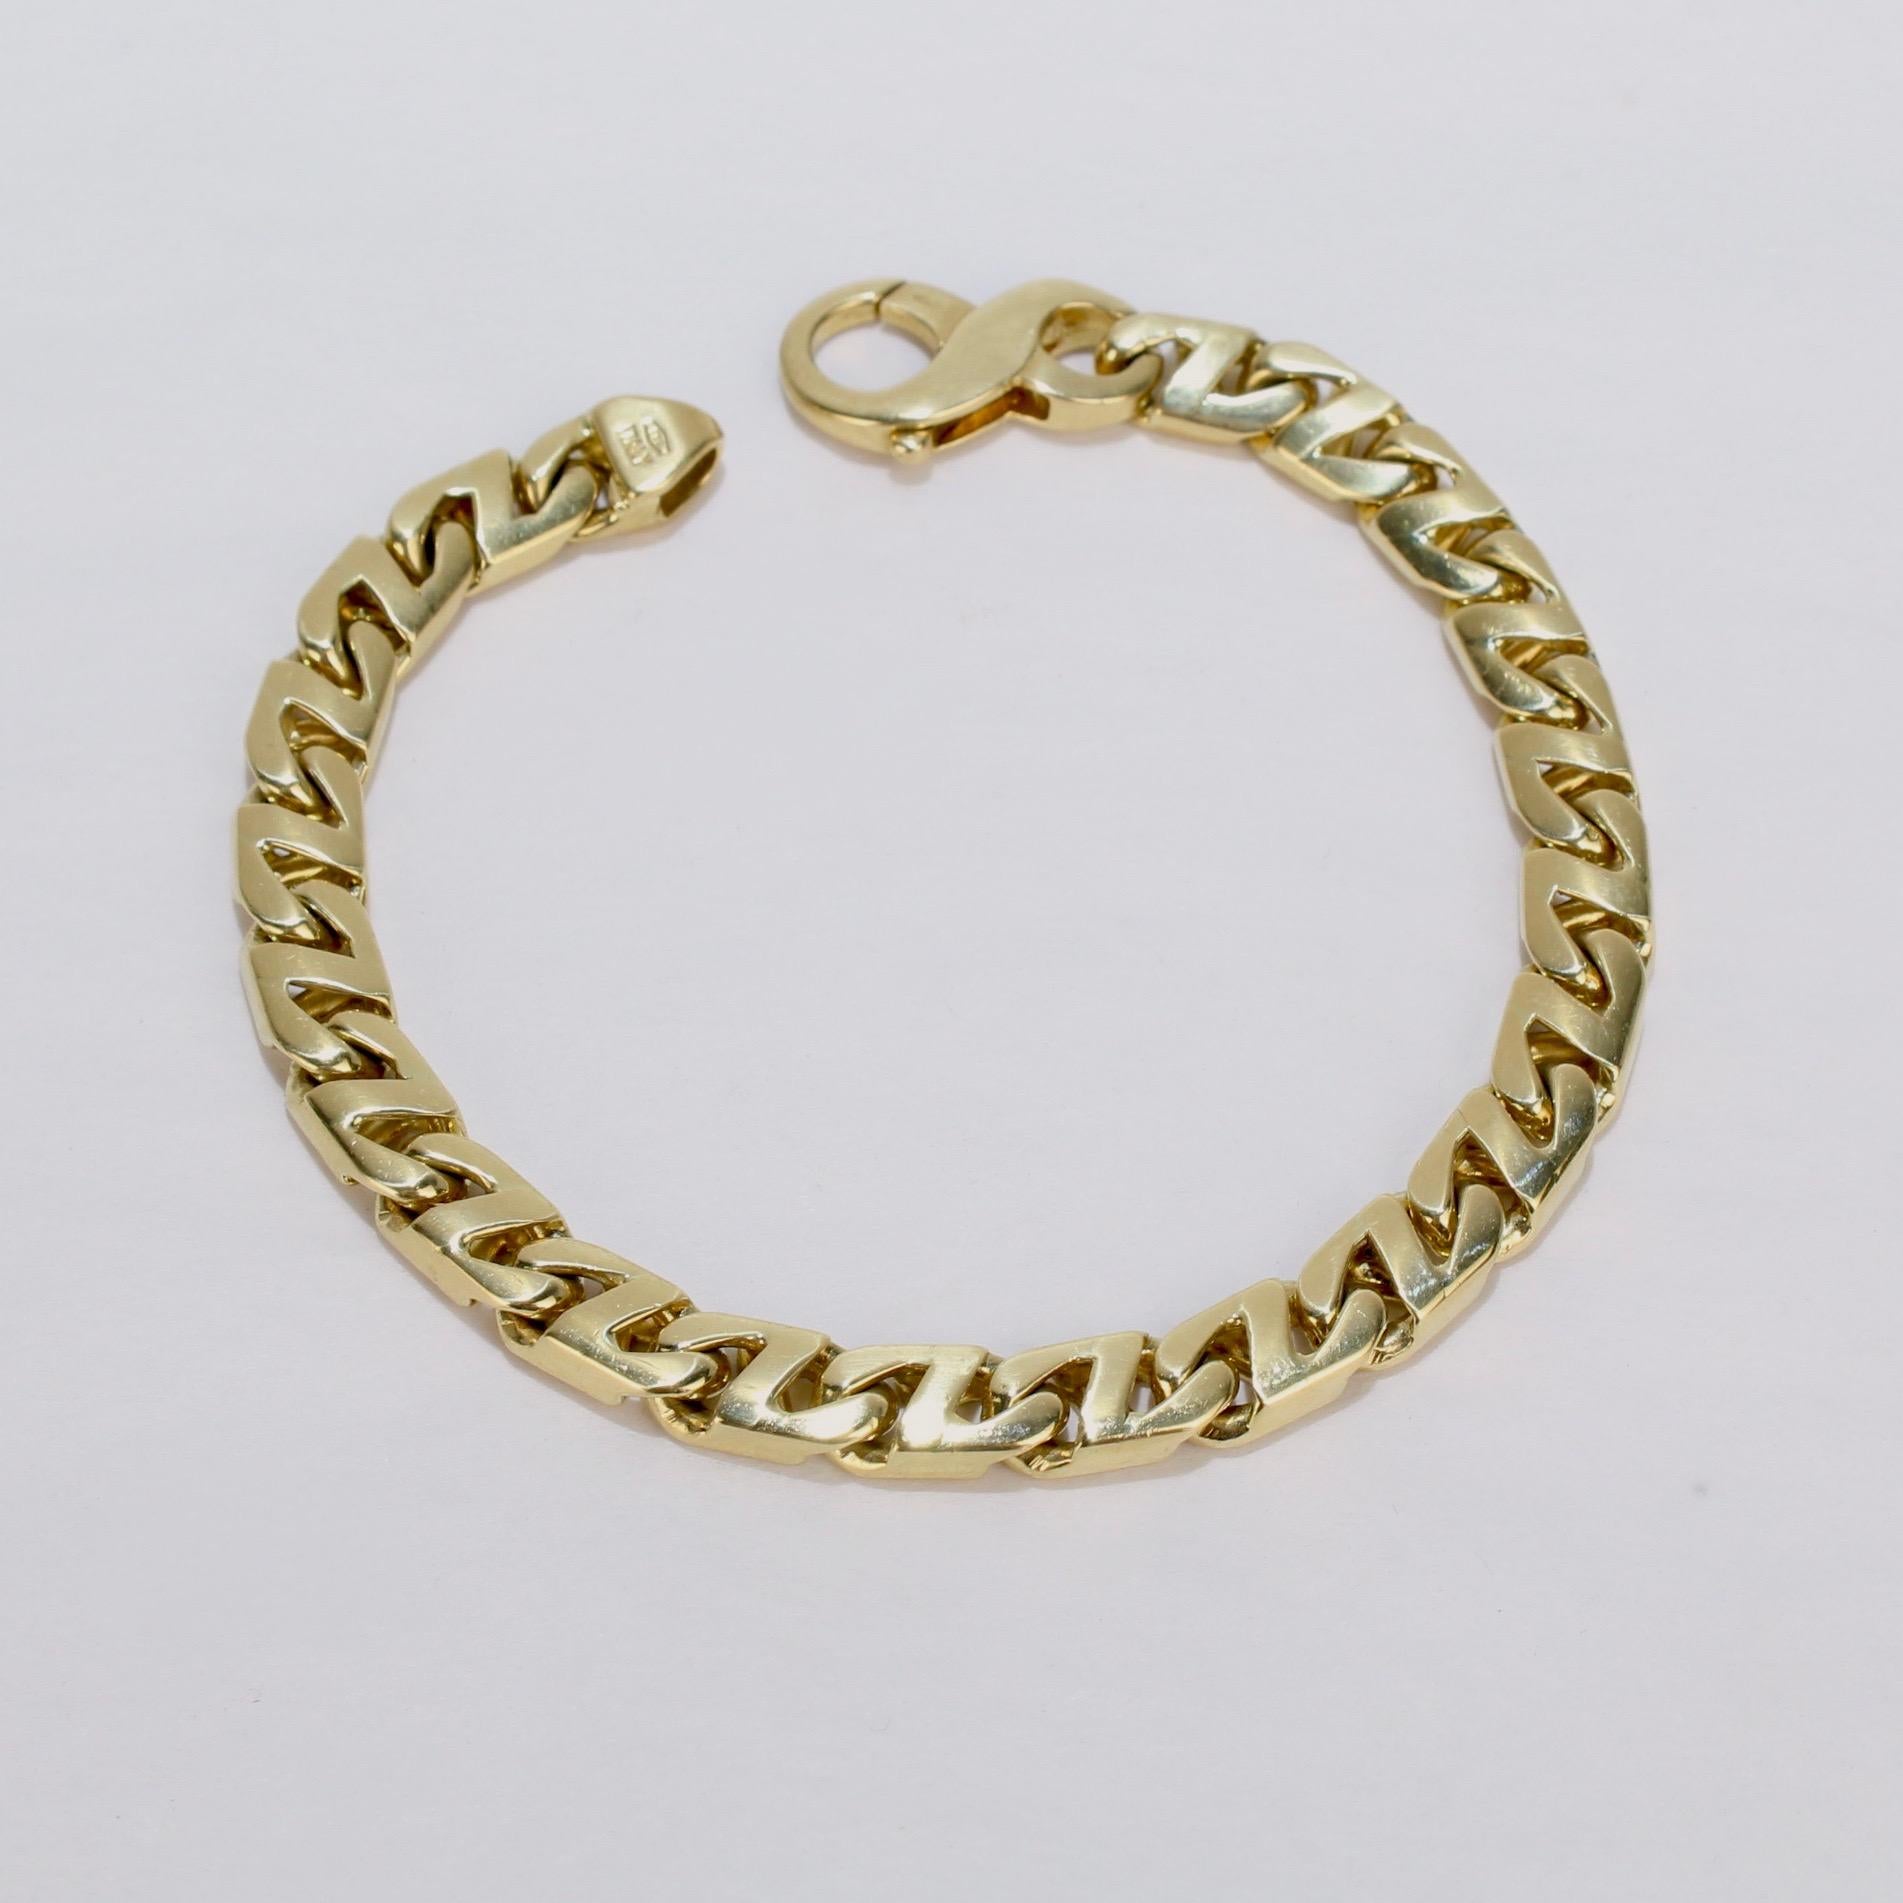 A vey fine Tiffany and Company 18k gold men's bracelet. 

The links are a heavy curb chain variant, and the bracelet is secured with a lobster claw clasp.

Circa 1980.

Marked to clasp with the T & Co. mark for Tiffany, 750 for 18k gold fineness,